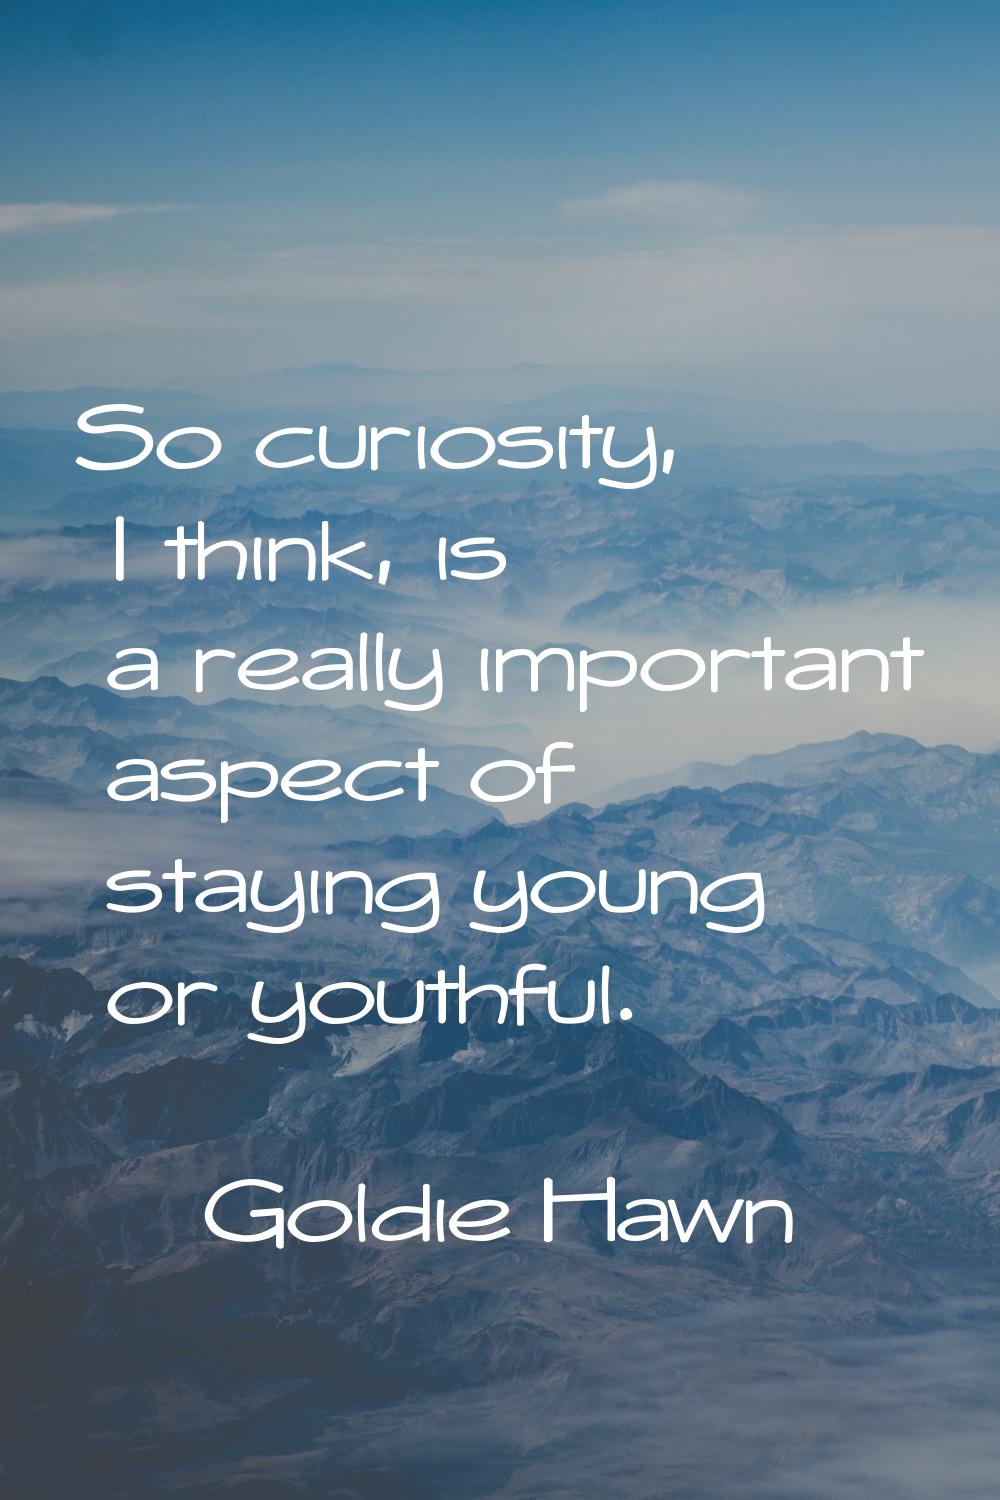 So curiosity, I think, is a really important aspect of staying young or youthful.